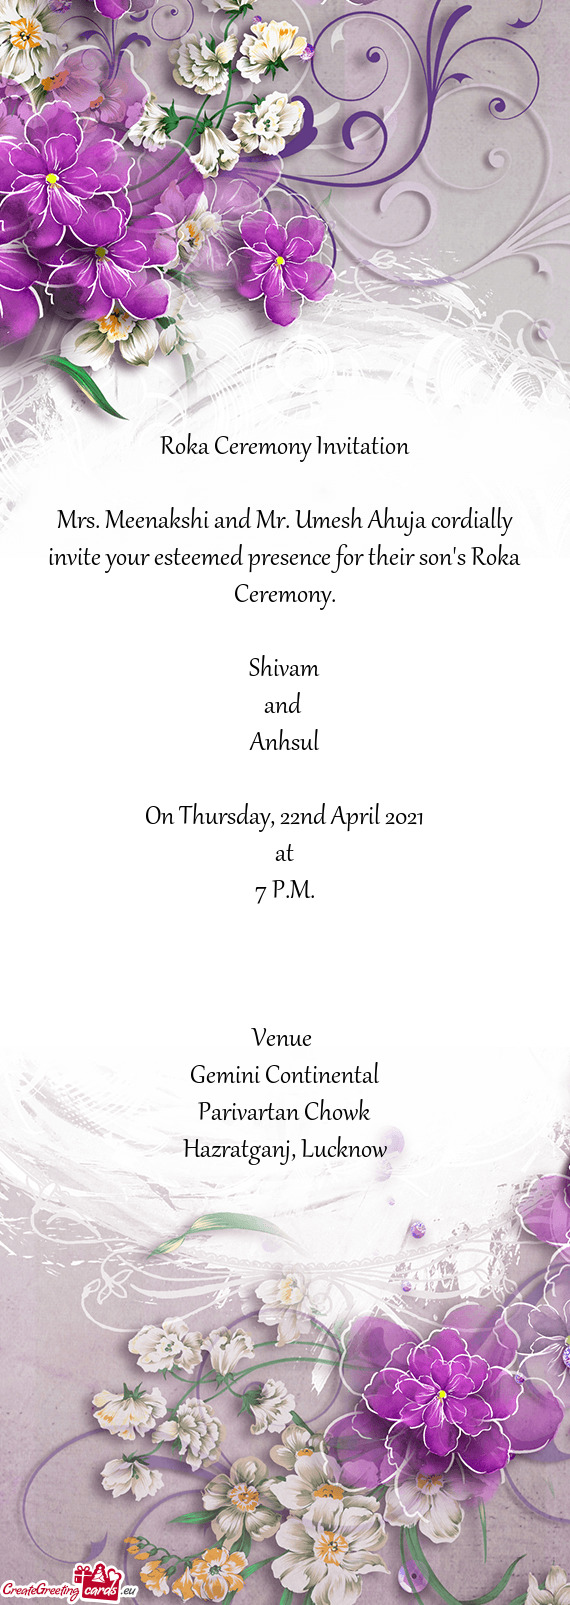 Mrs. Meenakshi and Mr. Umesh Ahuja cordially invite your esteemed presence for their son